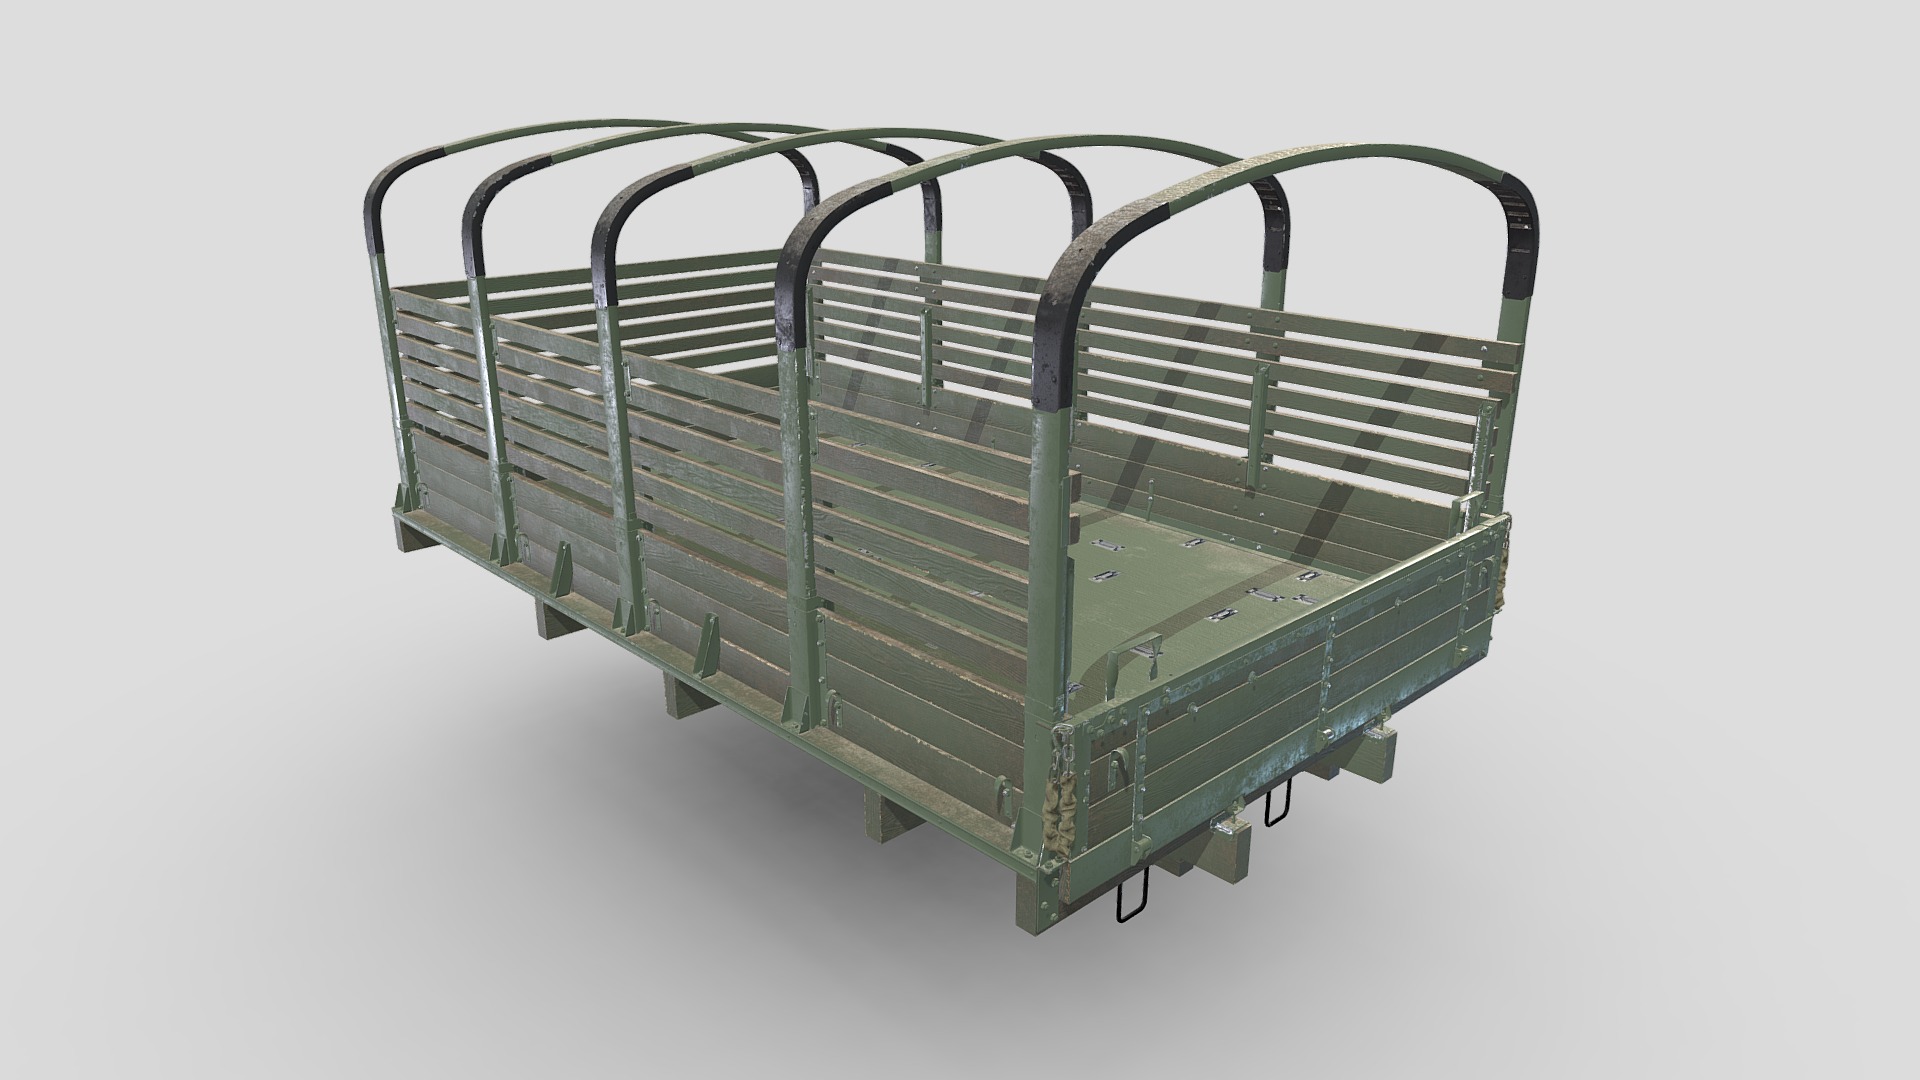 3D model ZIL- Platforma_Bort_v1 - This is a 3D model of the ZIL- Platforma_Bort_v1. The 3D model is about a shopping cart with a green basket.